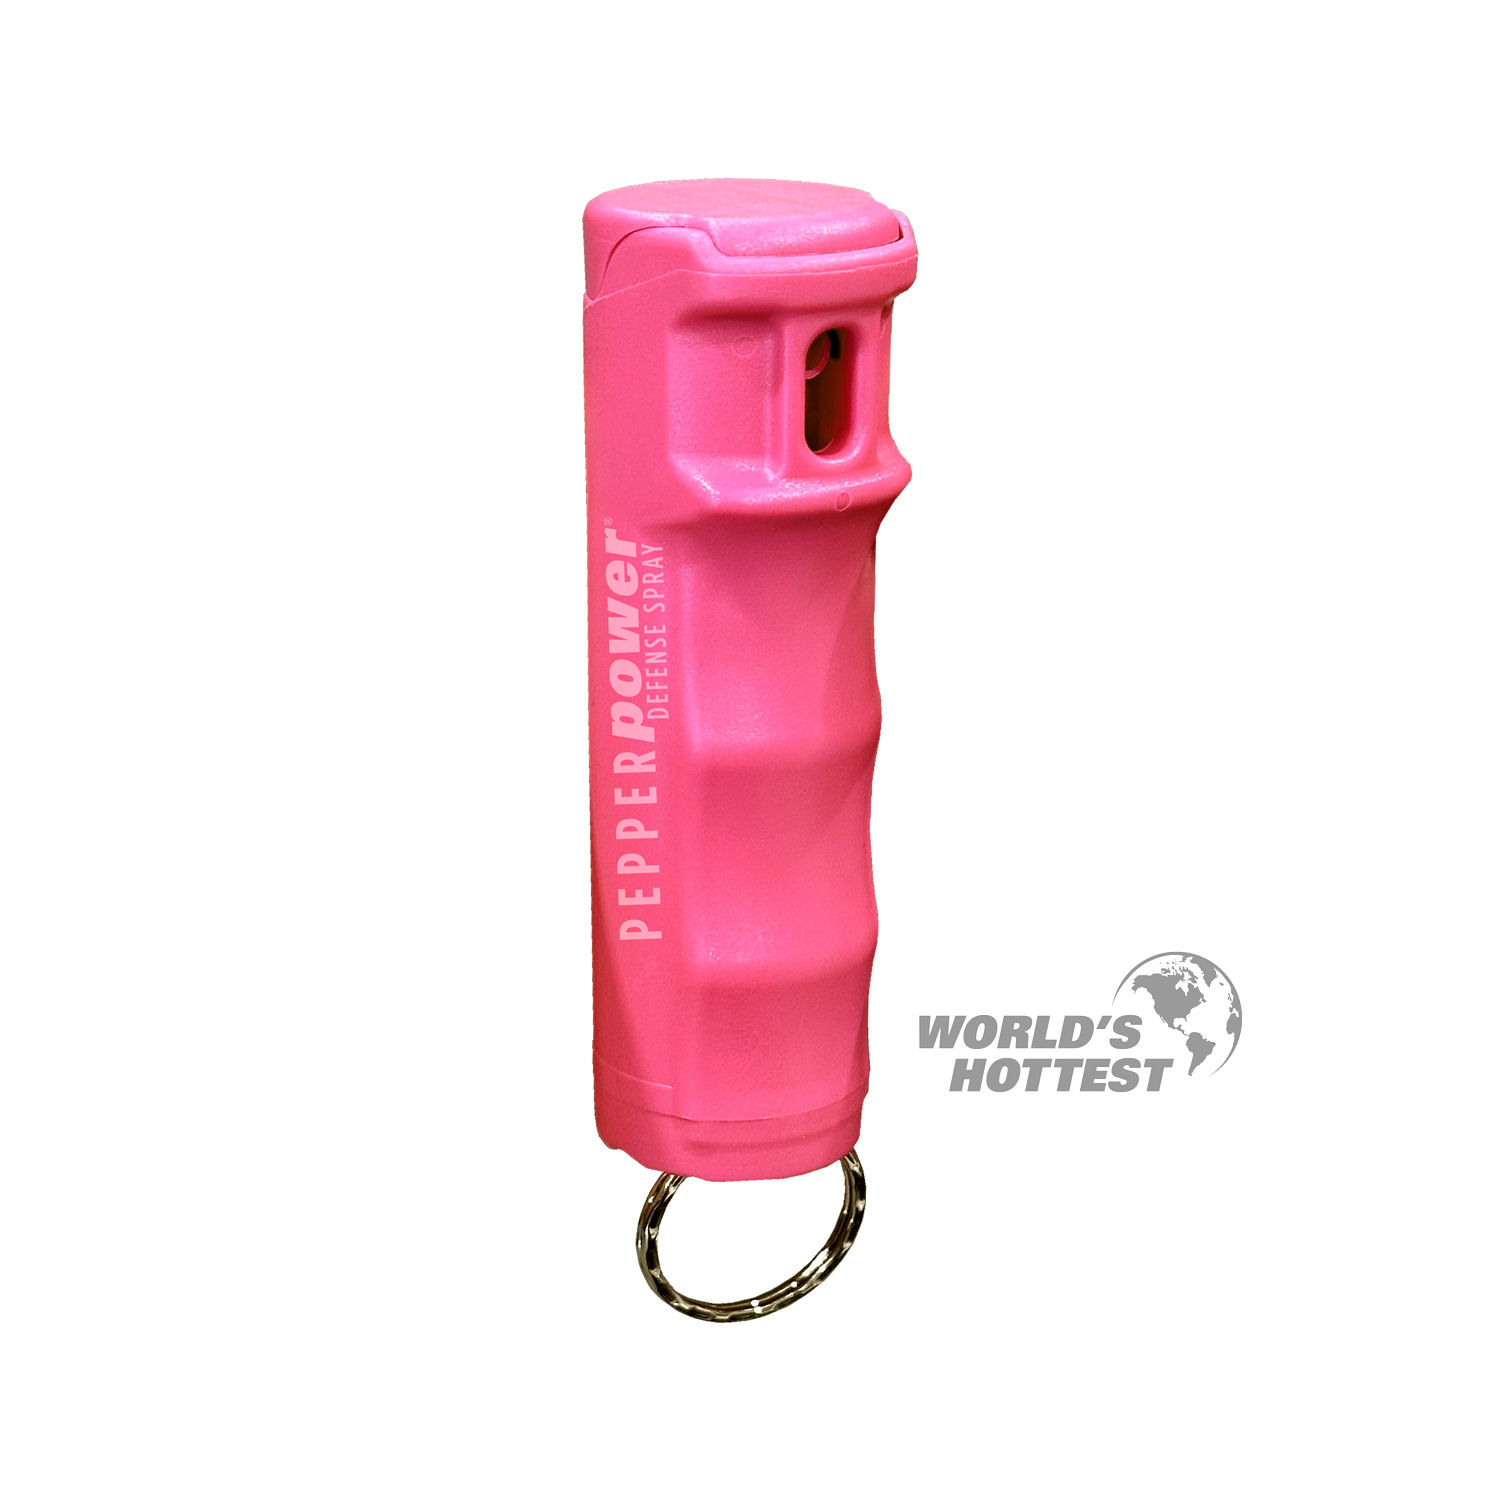 #PK1 UDAP Pink Keychain Pepper Spray Stream with the World's Hottest Formula - NEW!